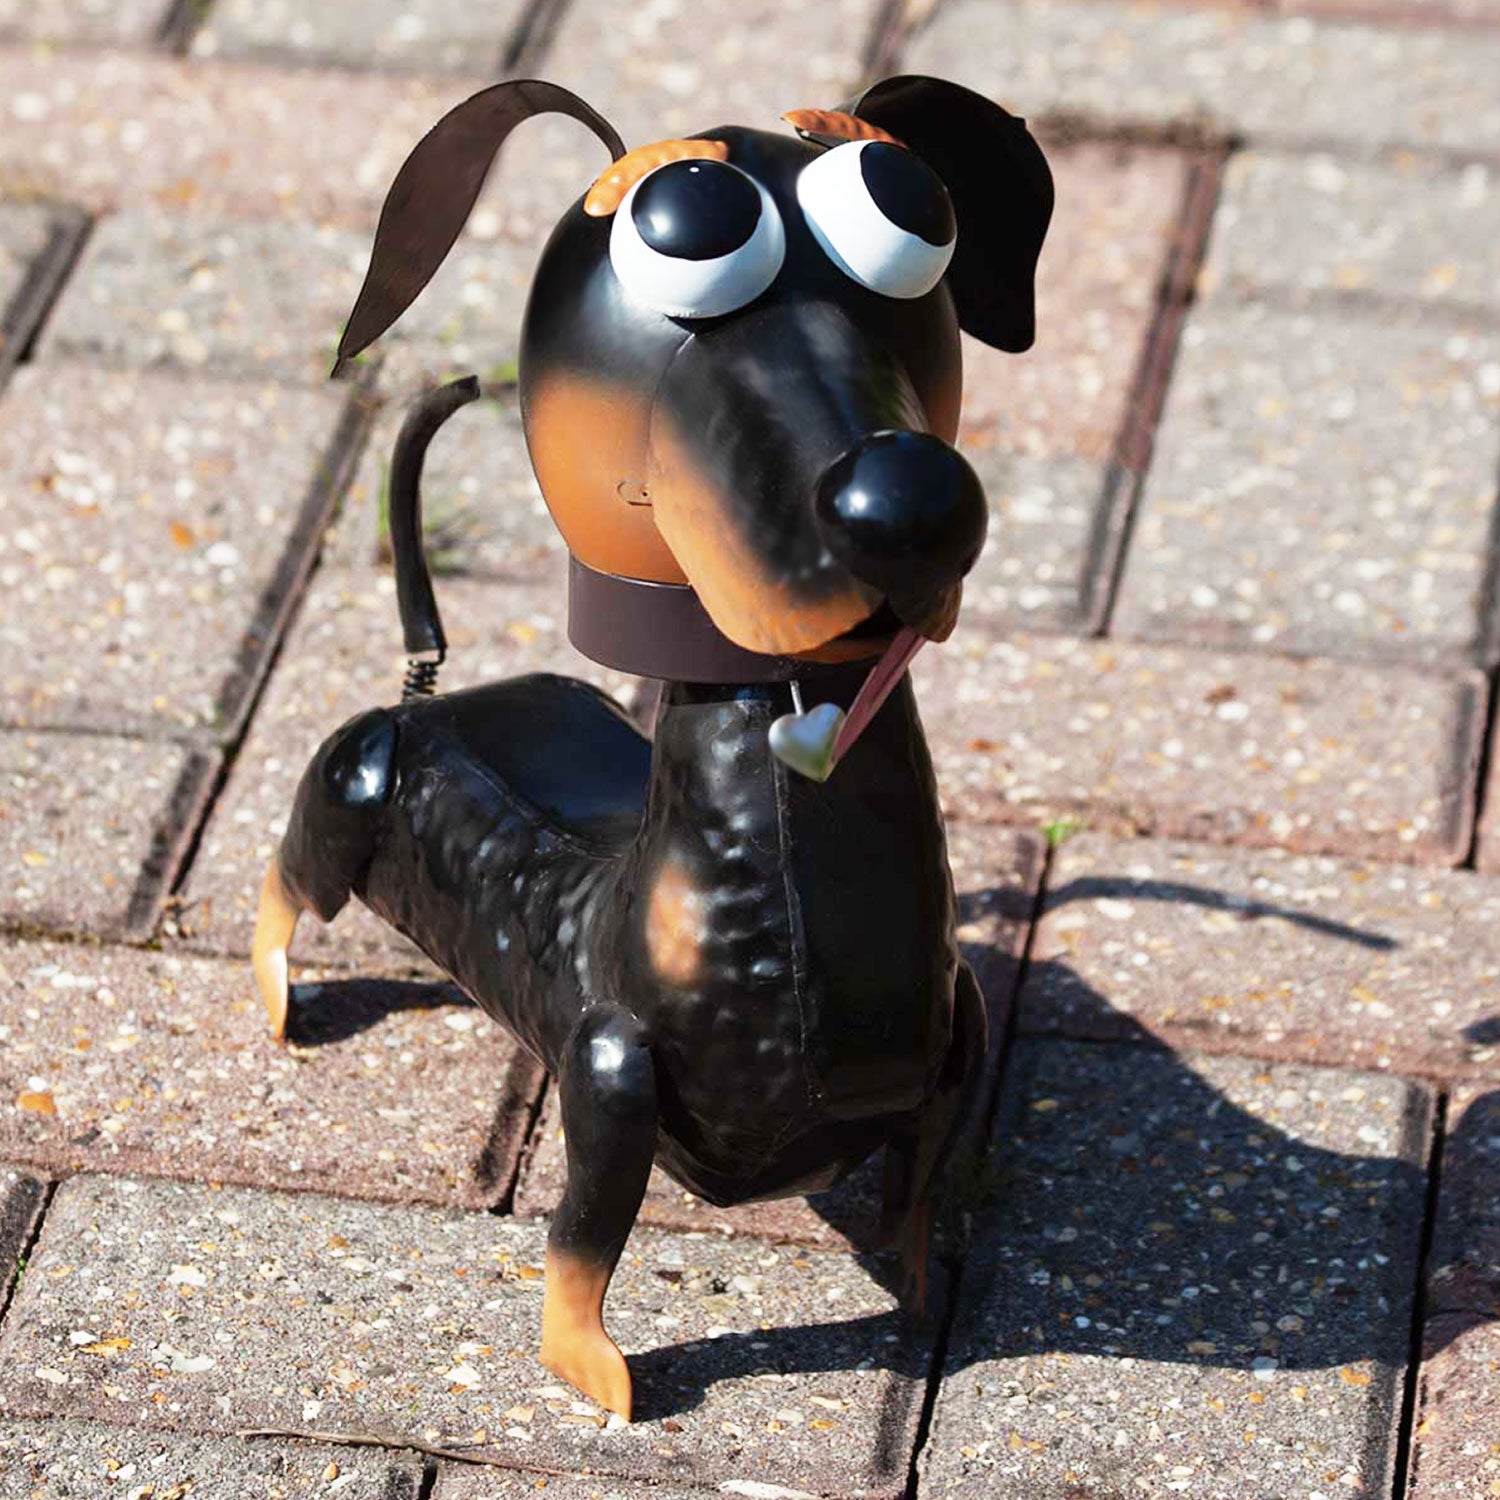 Dog Lover Gifts available at Dog Krazy Gifts – Bobble Buddies Dachshund, available at www.dogkrazygifts.co.uk